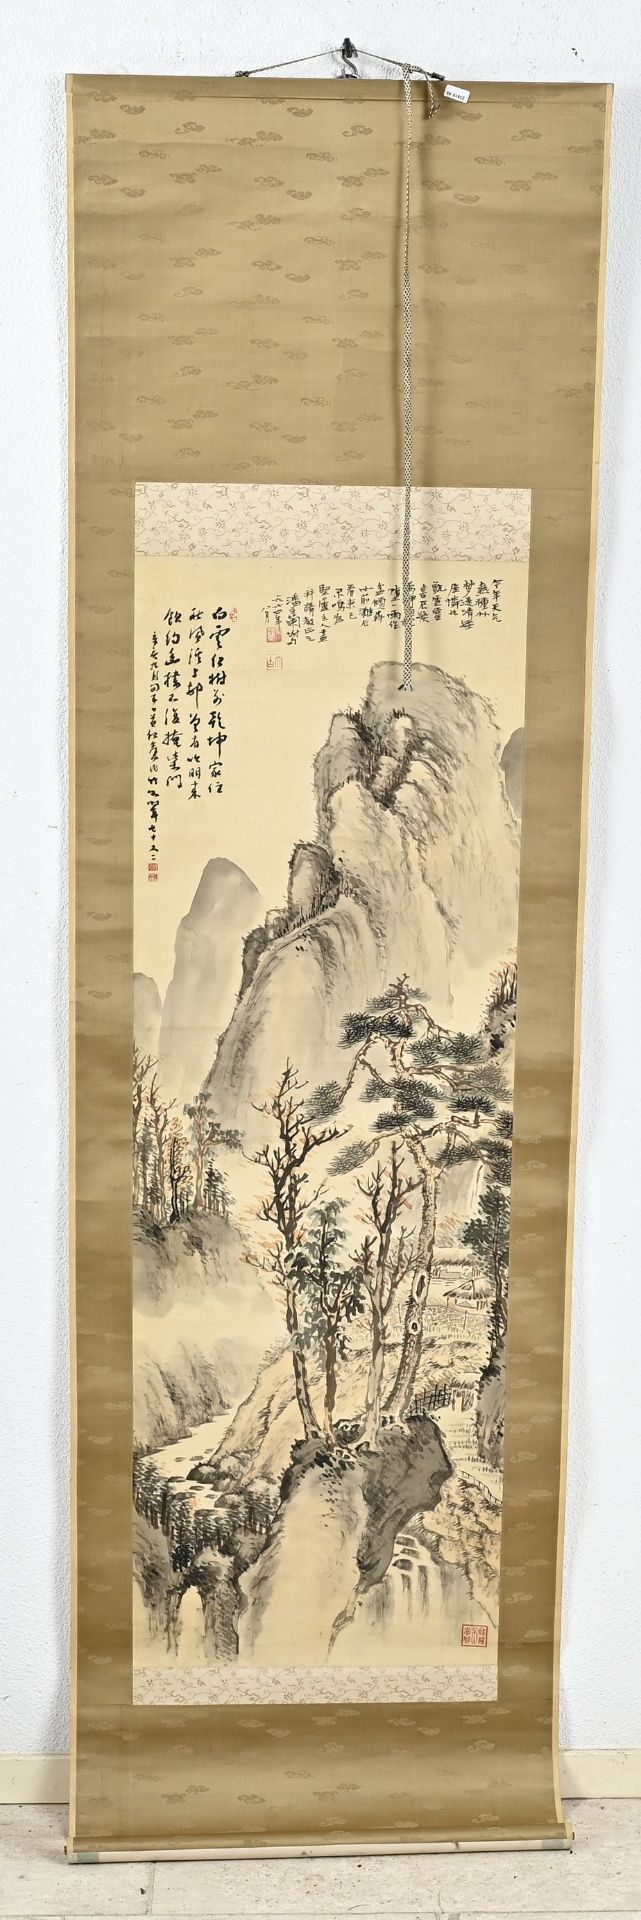 Chinese scroll painting, 123 x 42 cm.